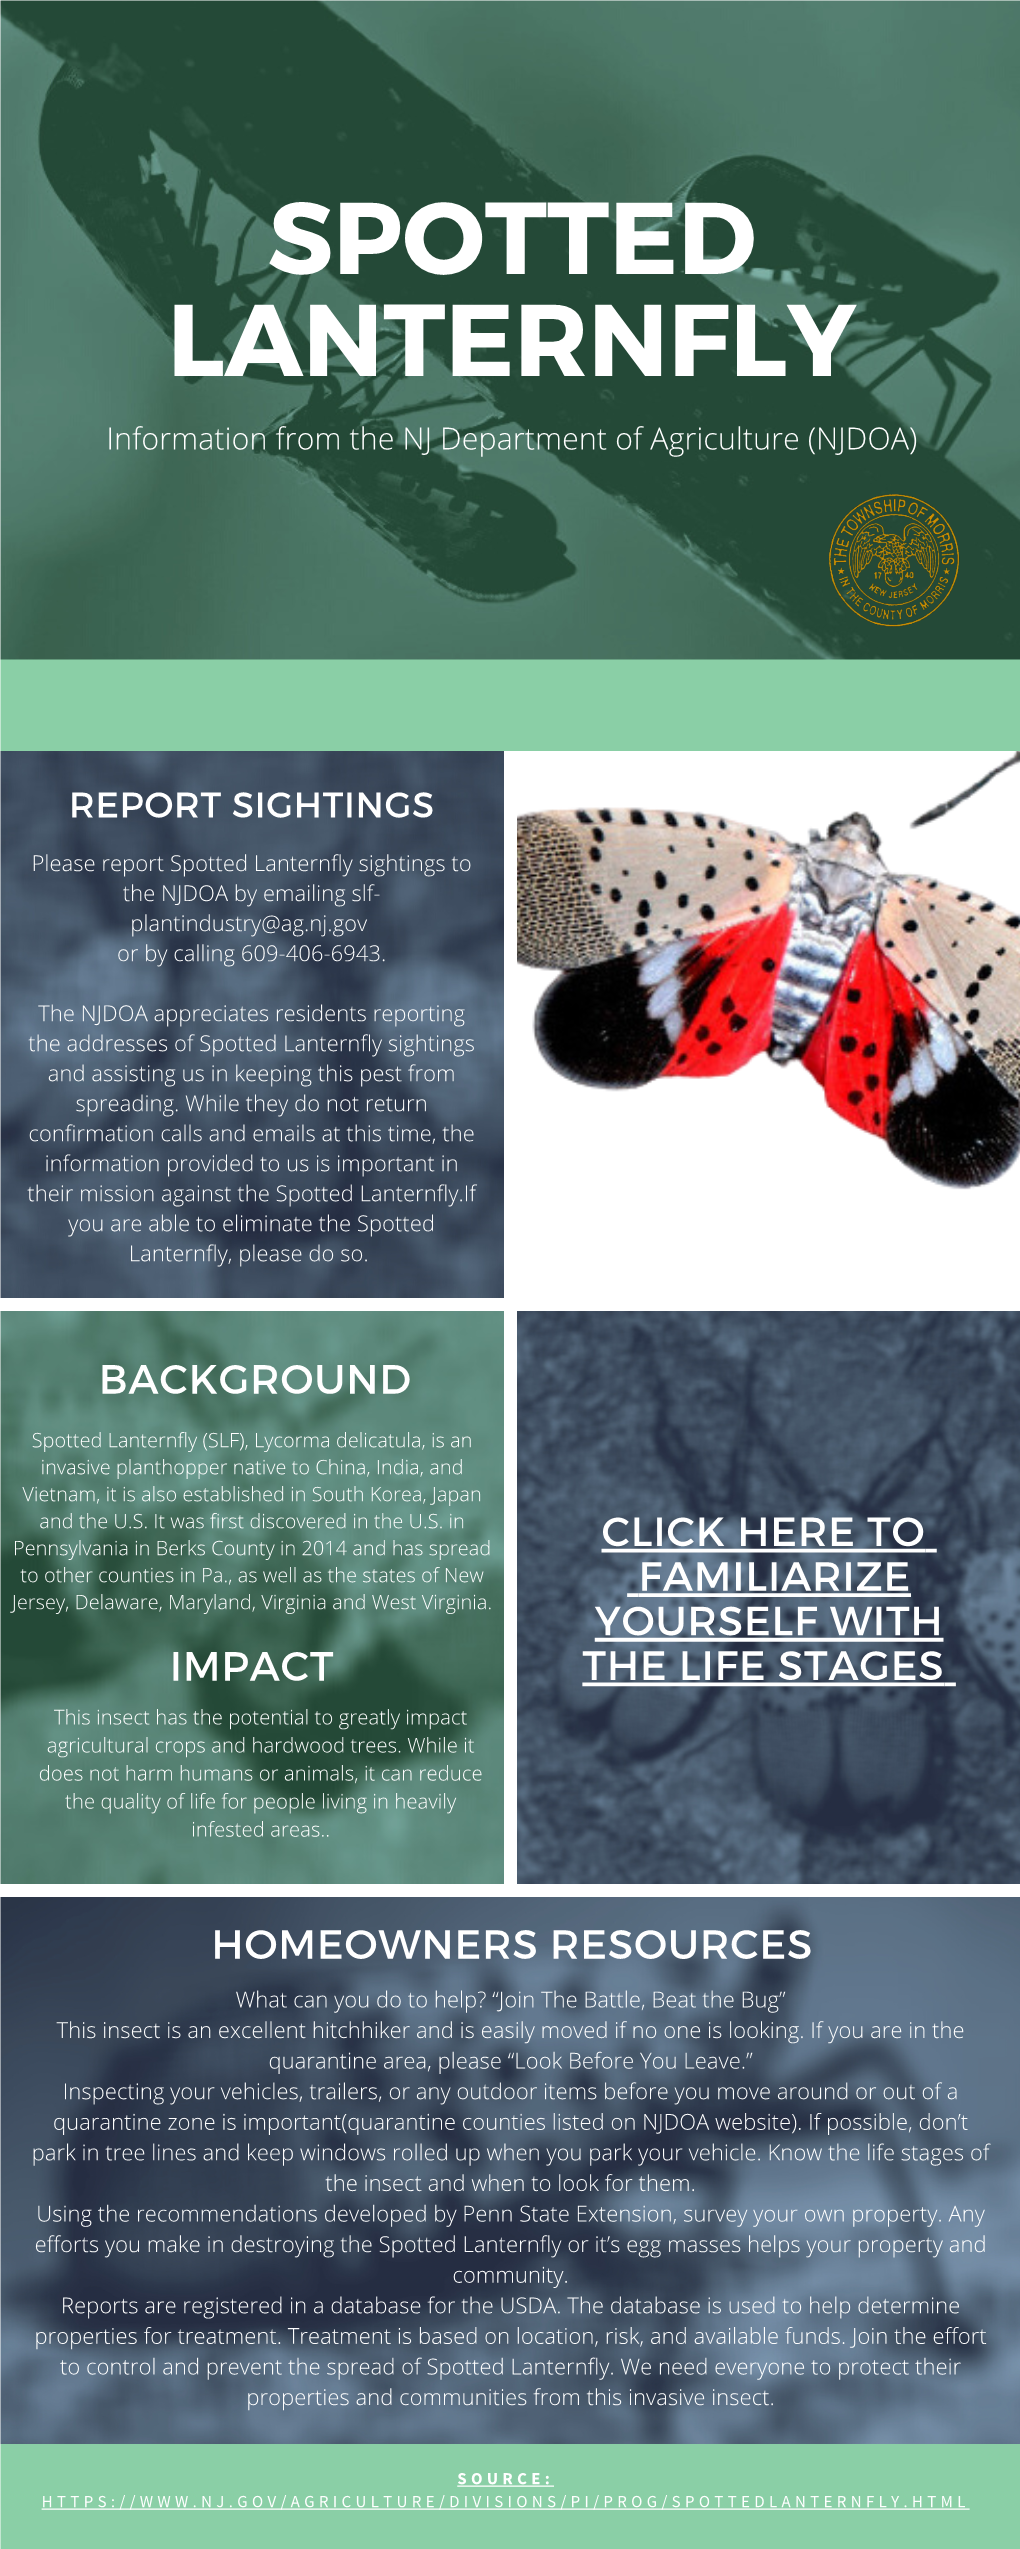 Spotted Lanternfly Infographic